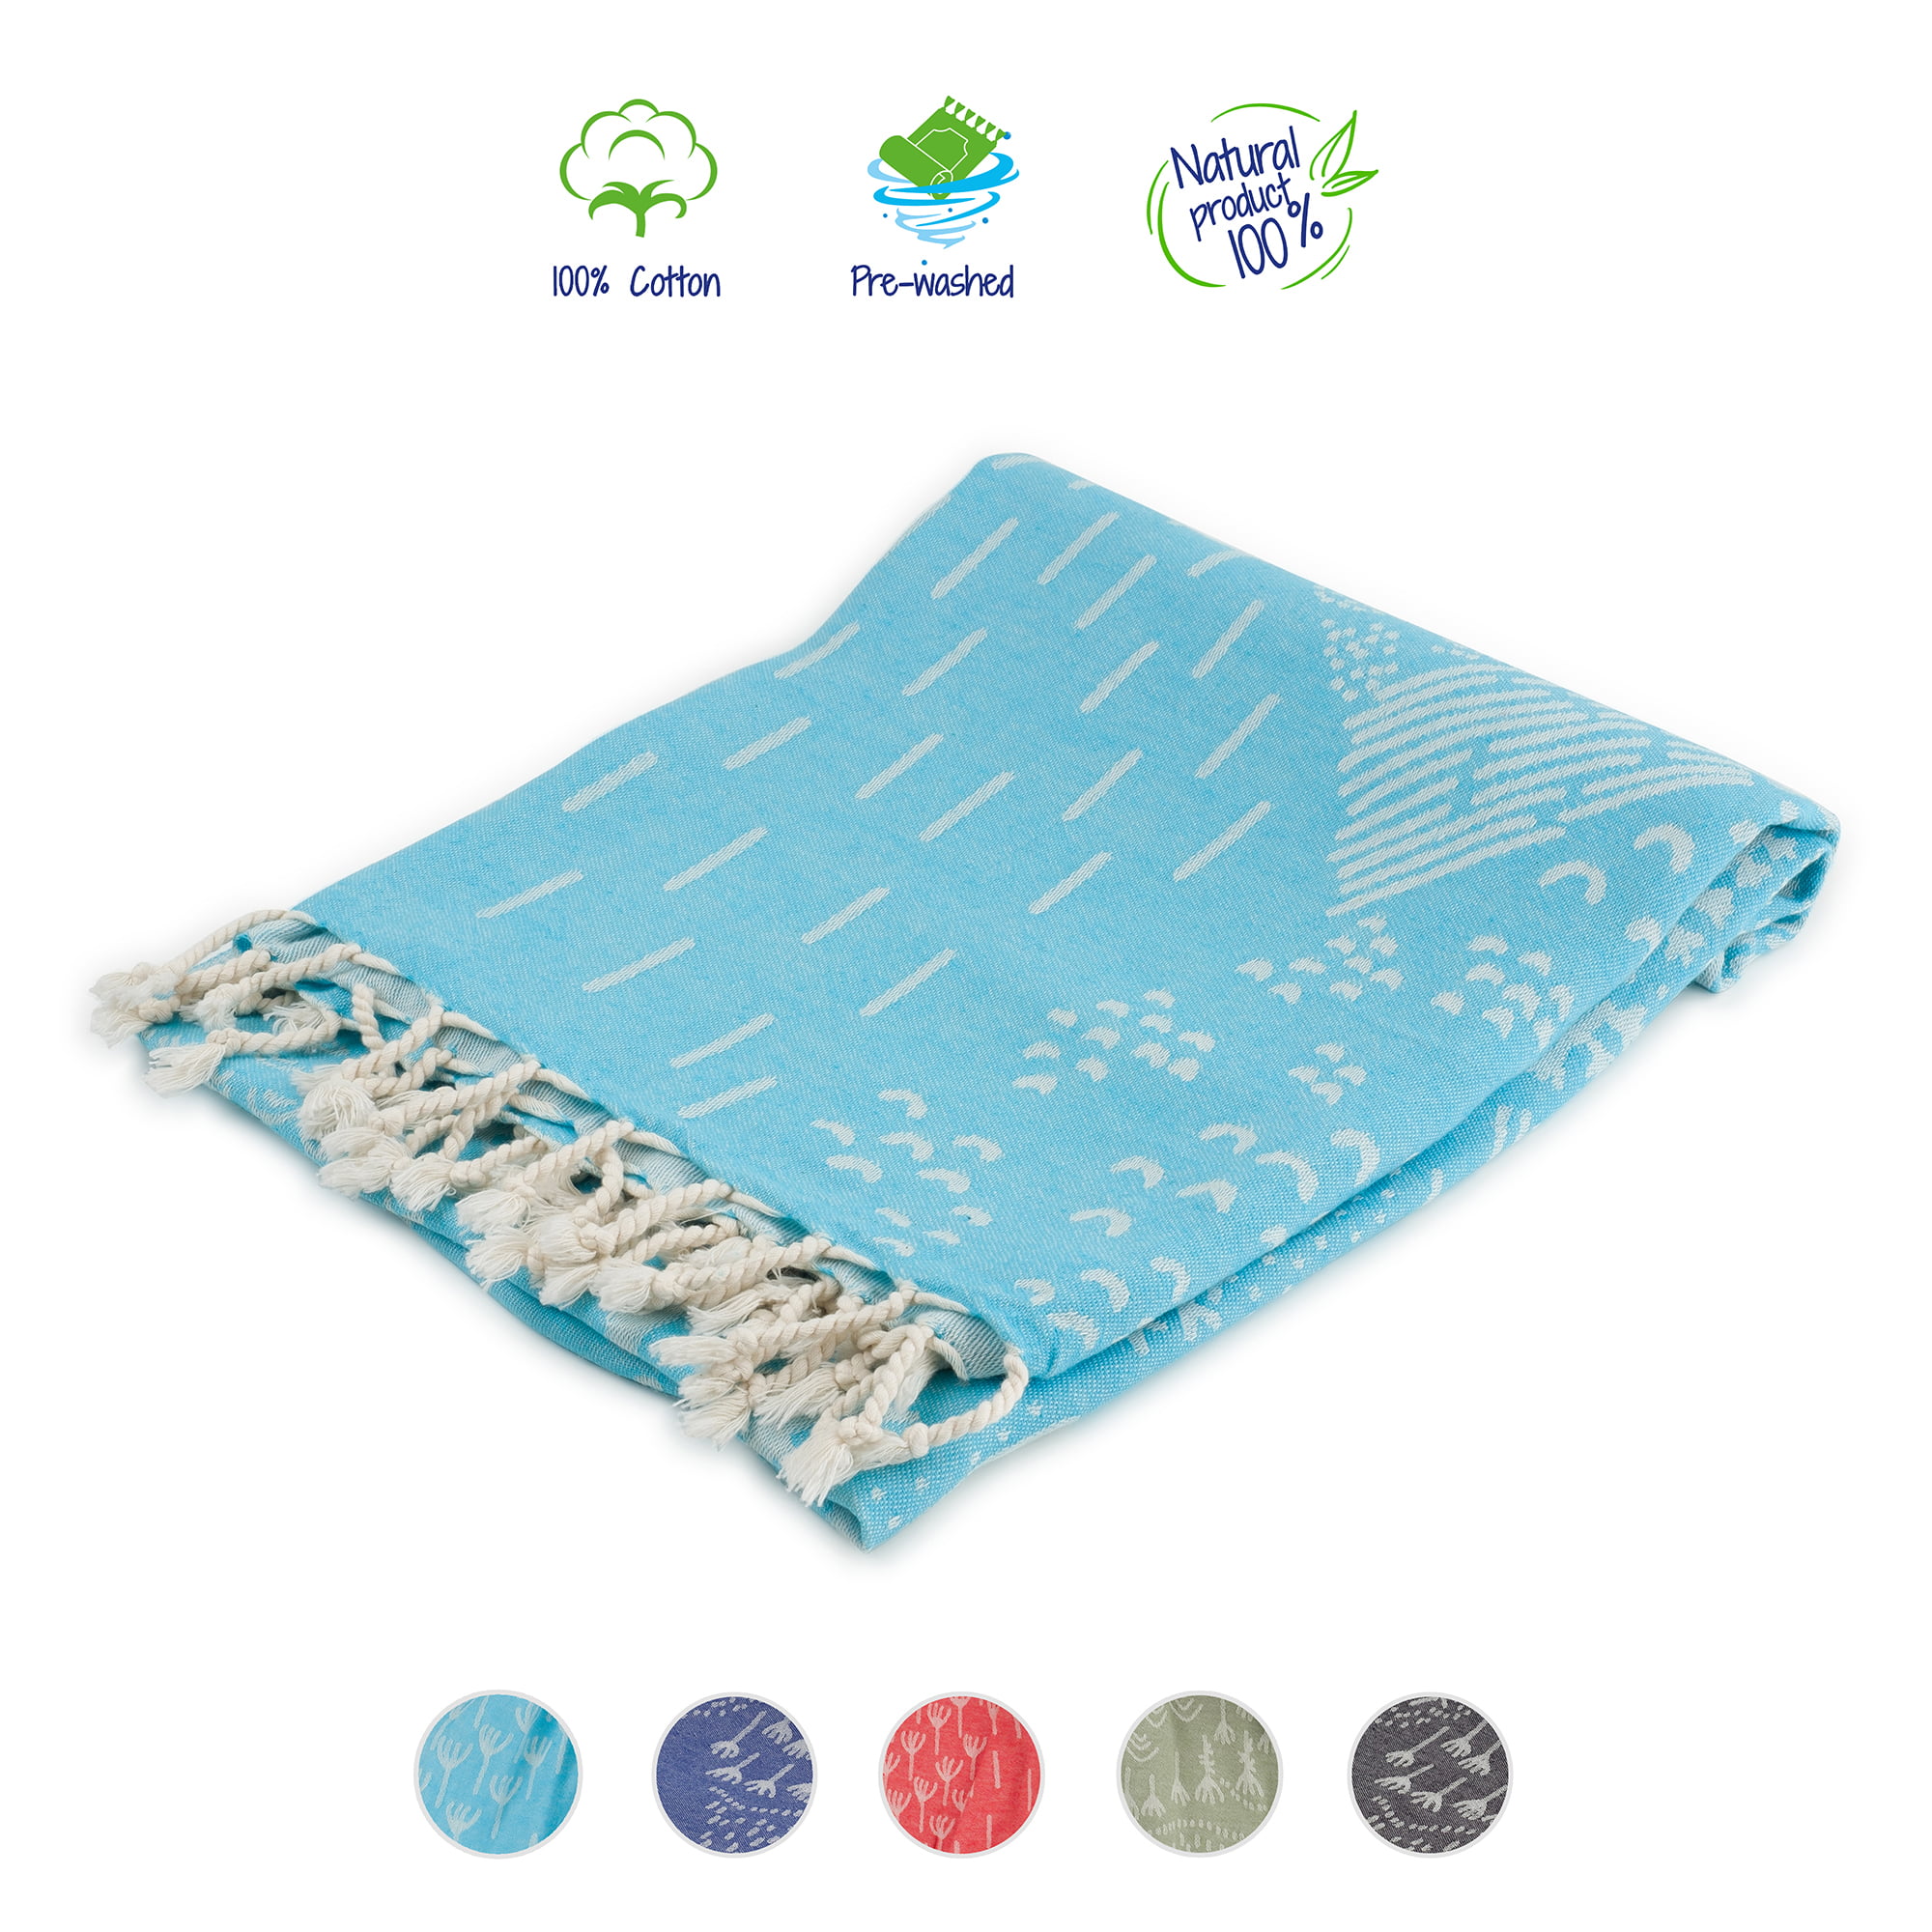 RESERVED XL 100% Cotton Velour 100x180cm Extra Large Pool Beach Surf Towel 